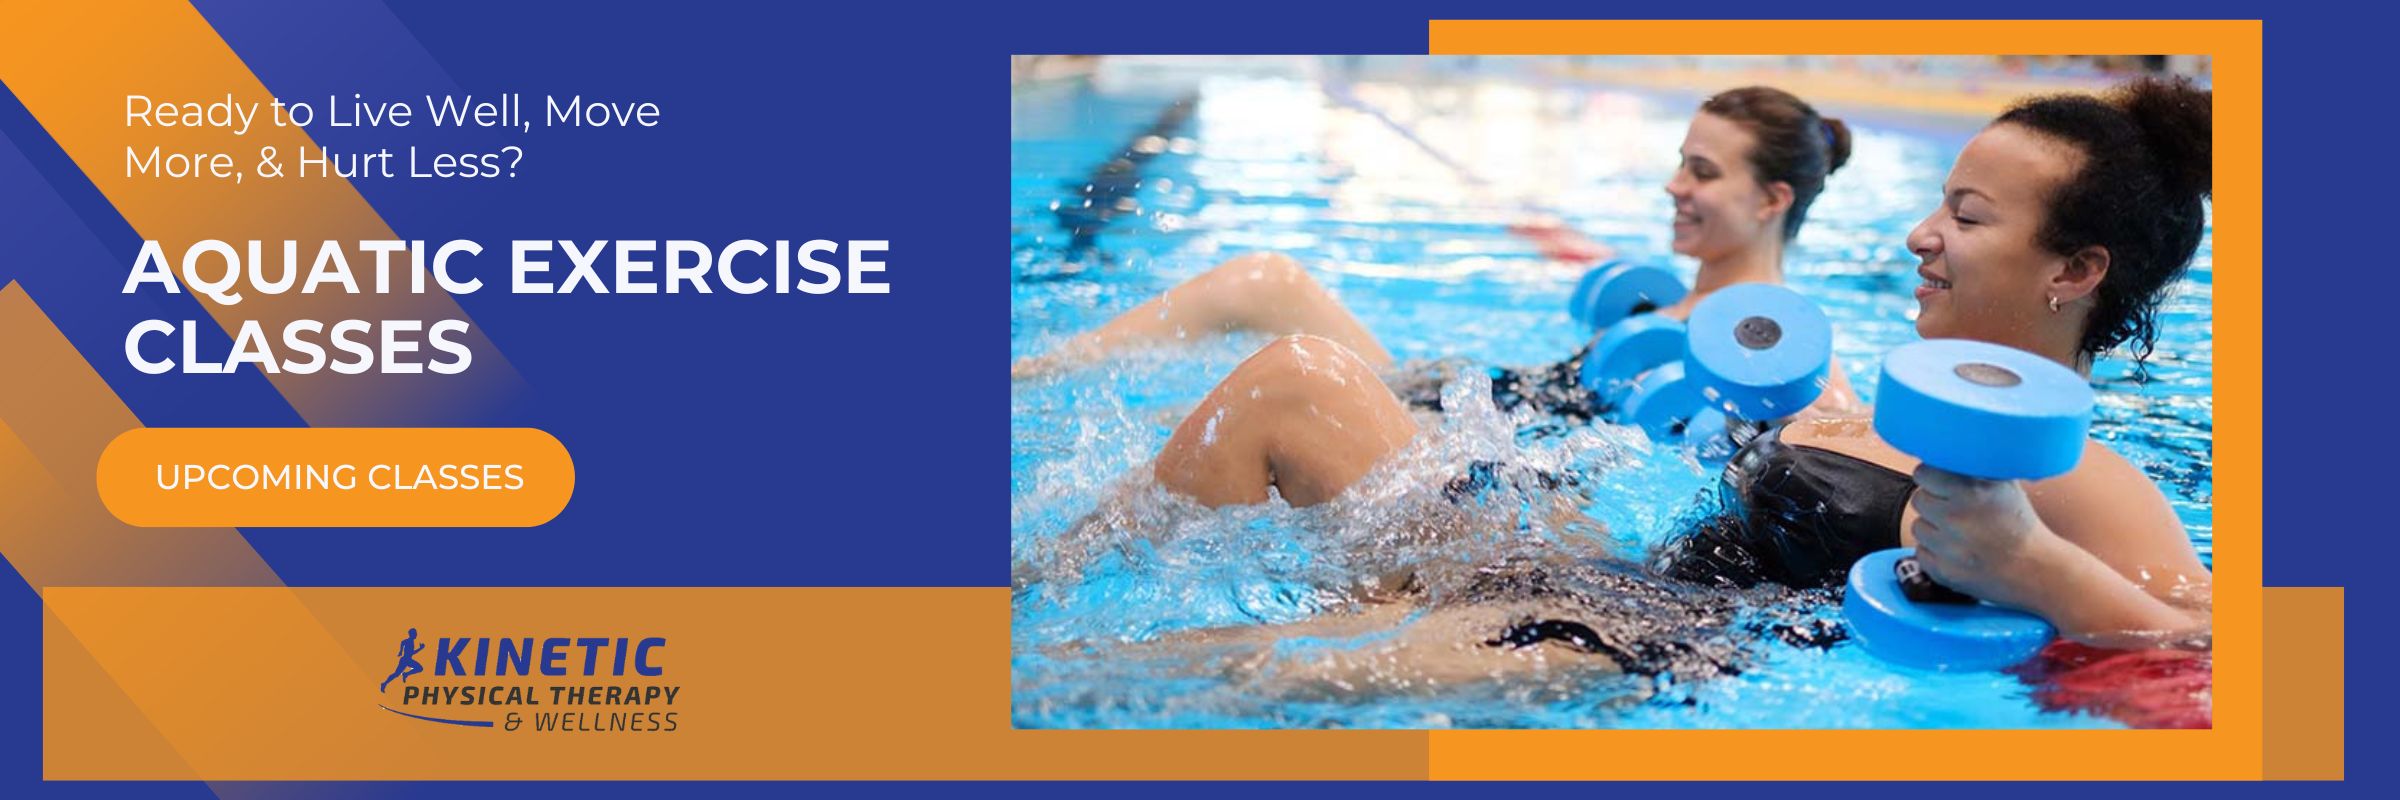 Aquatic Exercise Classes Upcoming in Greenville, NC